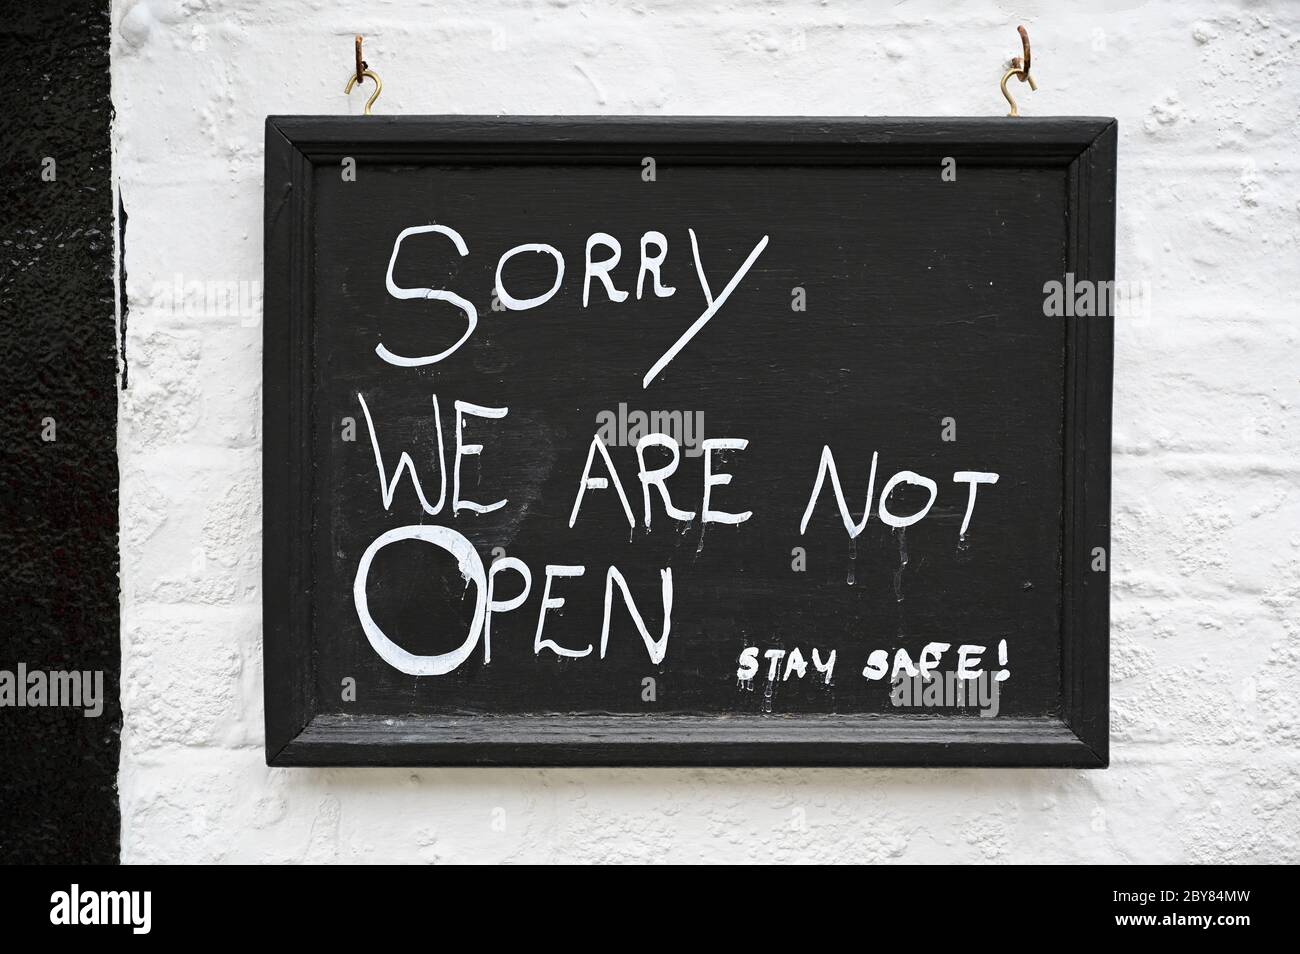 Coronavirus Pandemic. A pub in Shoreham informs it's customers that it is closed whilst telling them to 'stay safe' Shoreham, Kent. UK Stock Photo